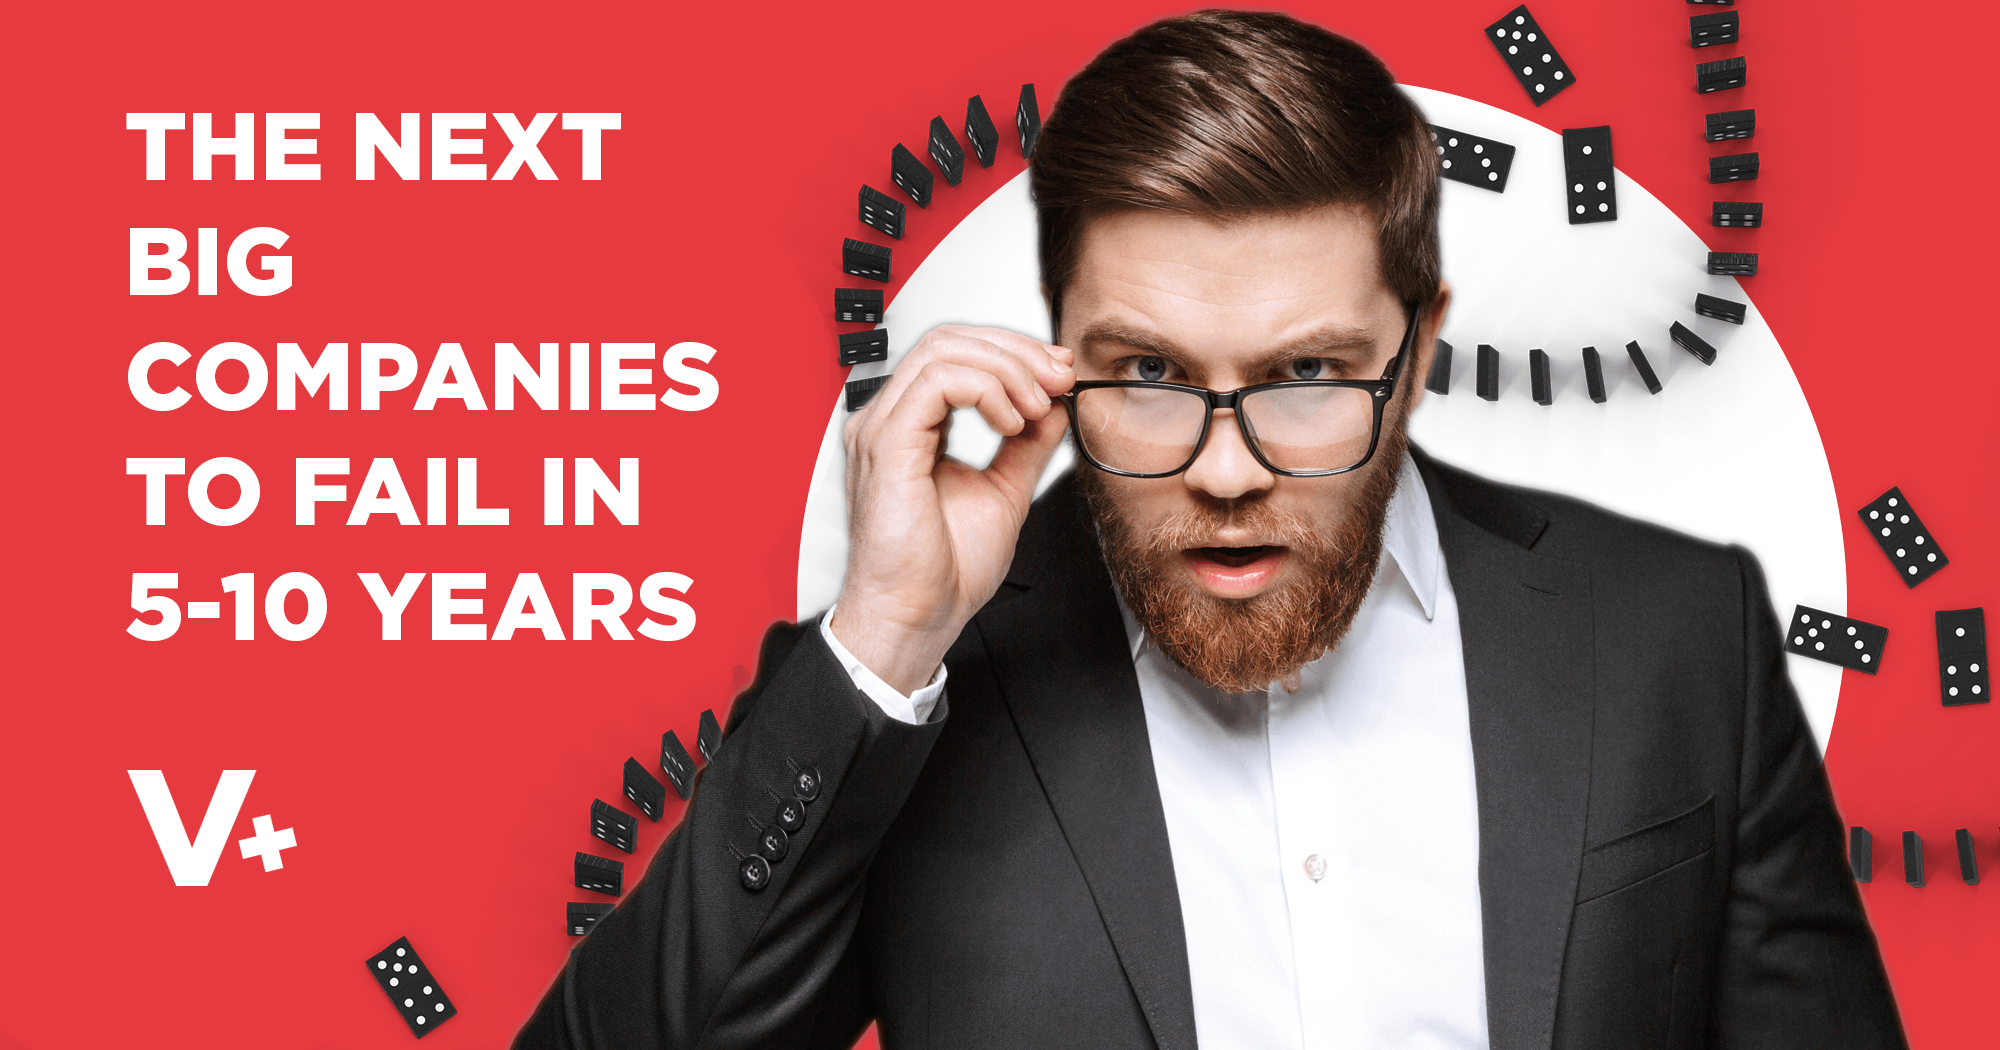 The Next Big Companies to Fail in 5-10 Years